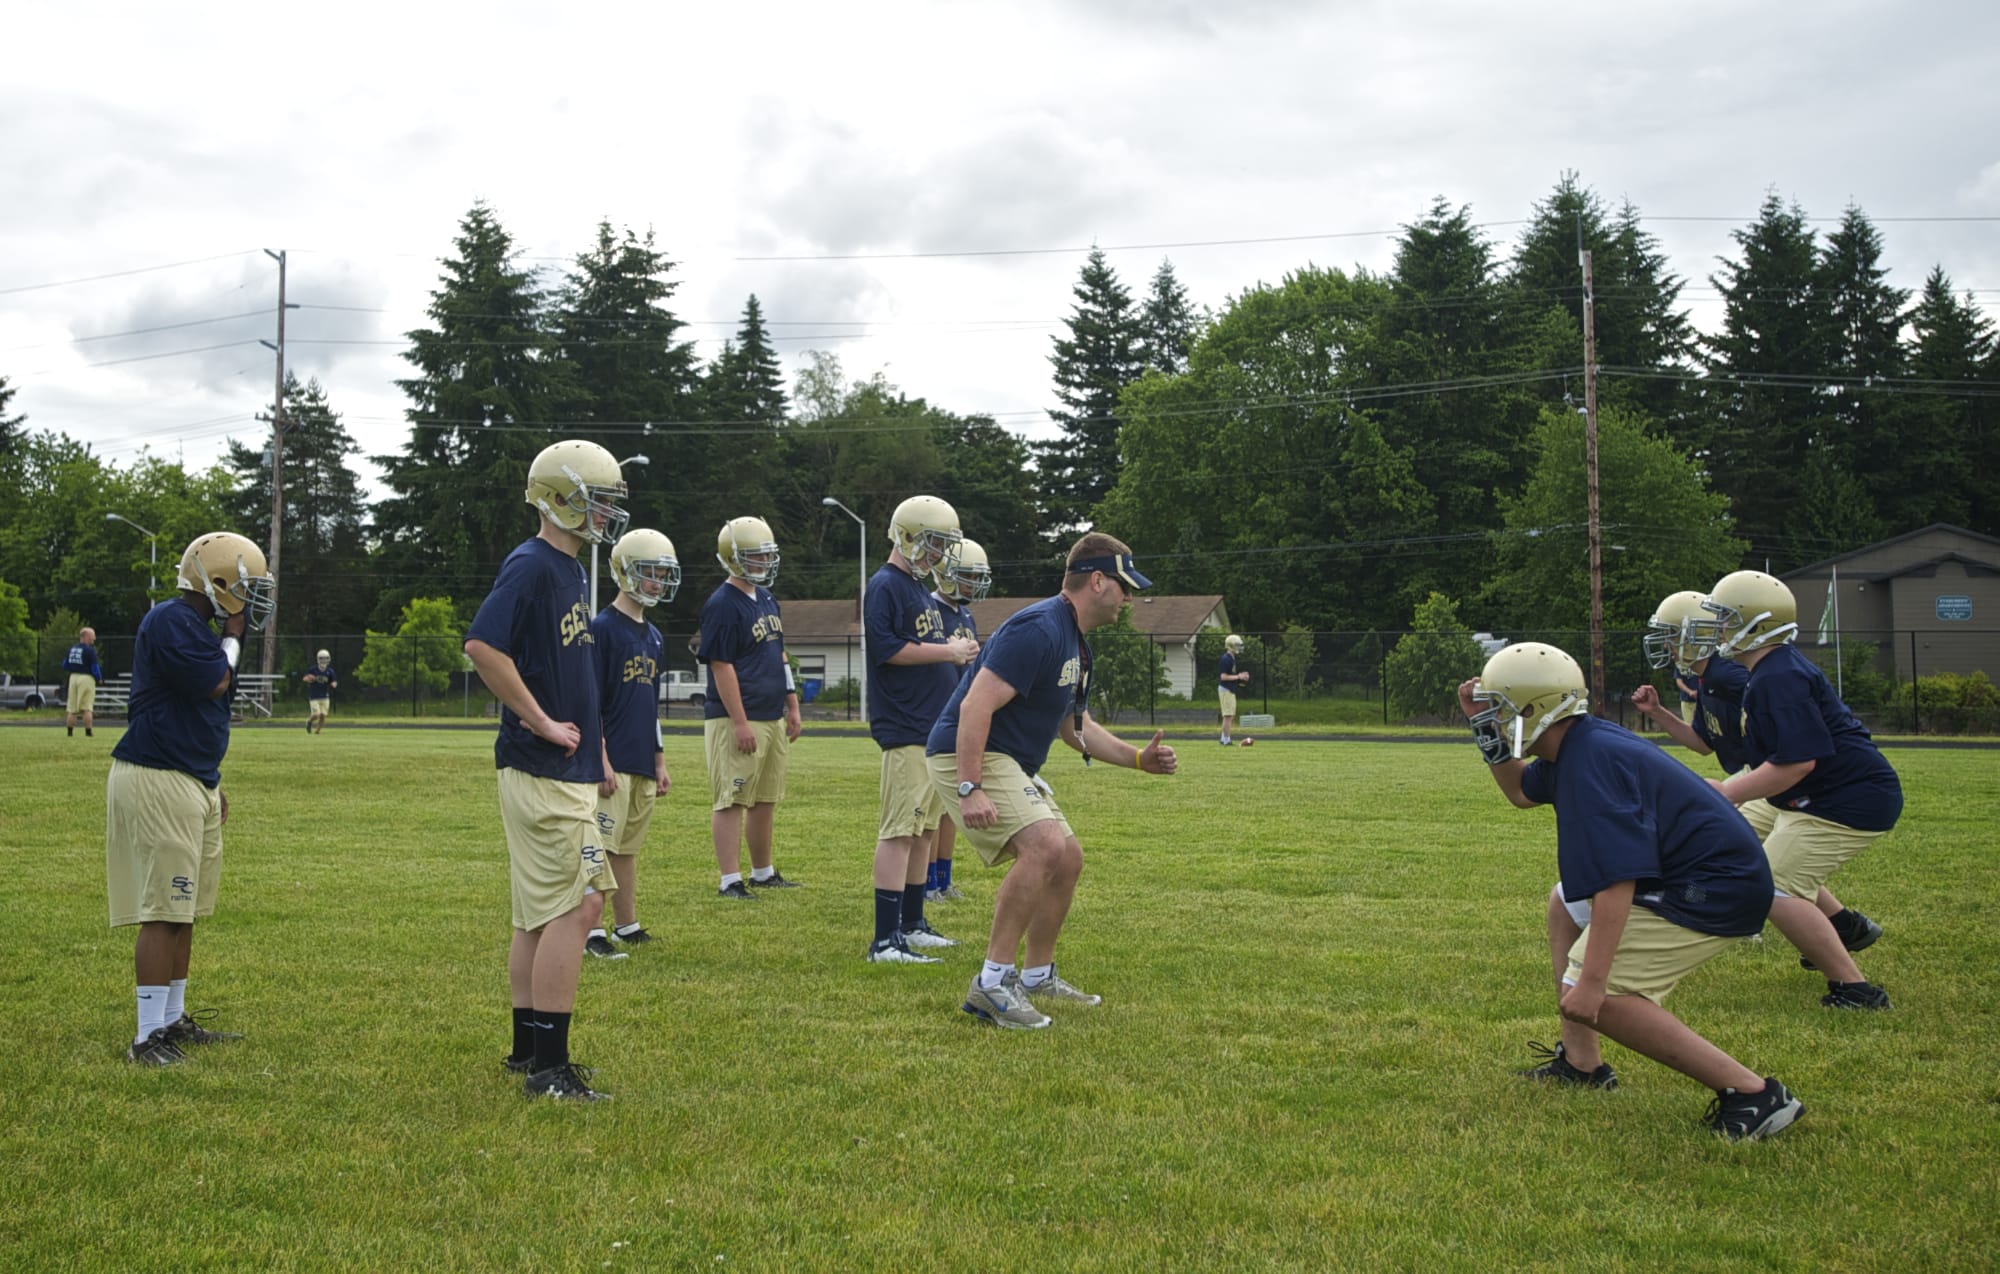 Seton Catholic High School offensive line coach Kasey Powers, center, puts players through a drill during football practice at Cascade Middel School on Thursday May 31, 2012.